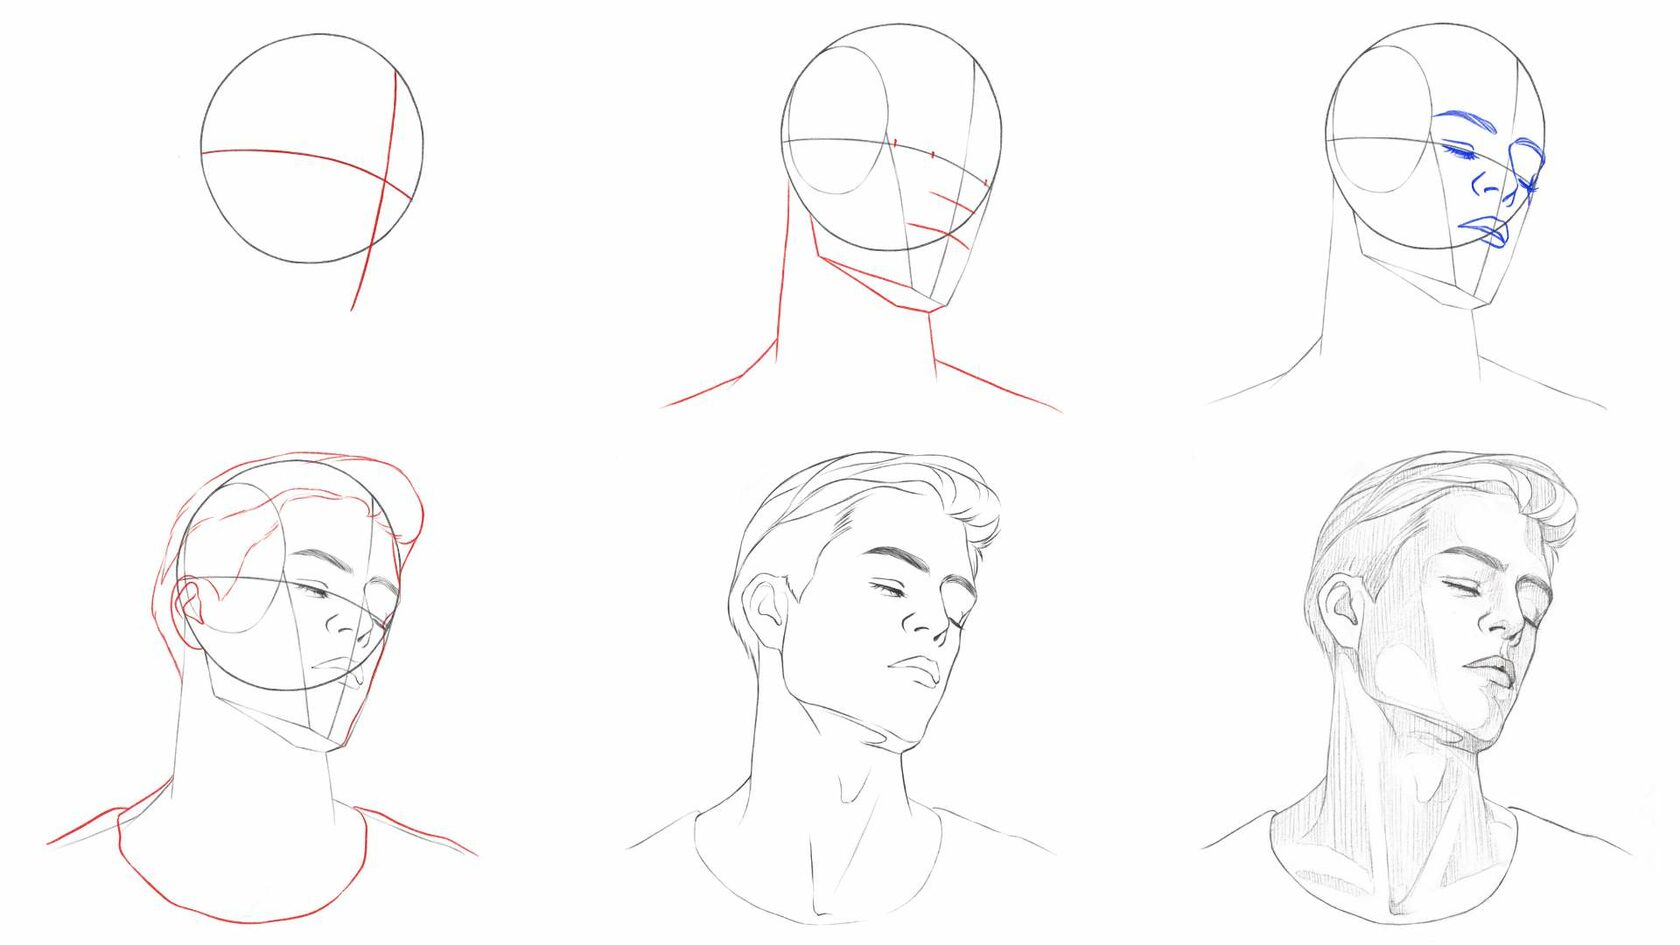 How to Draw a Portrait in the Three Quarters View